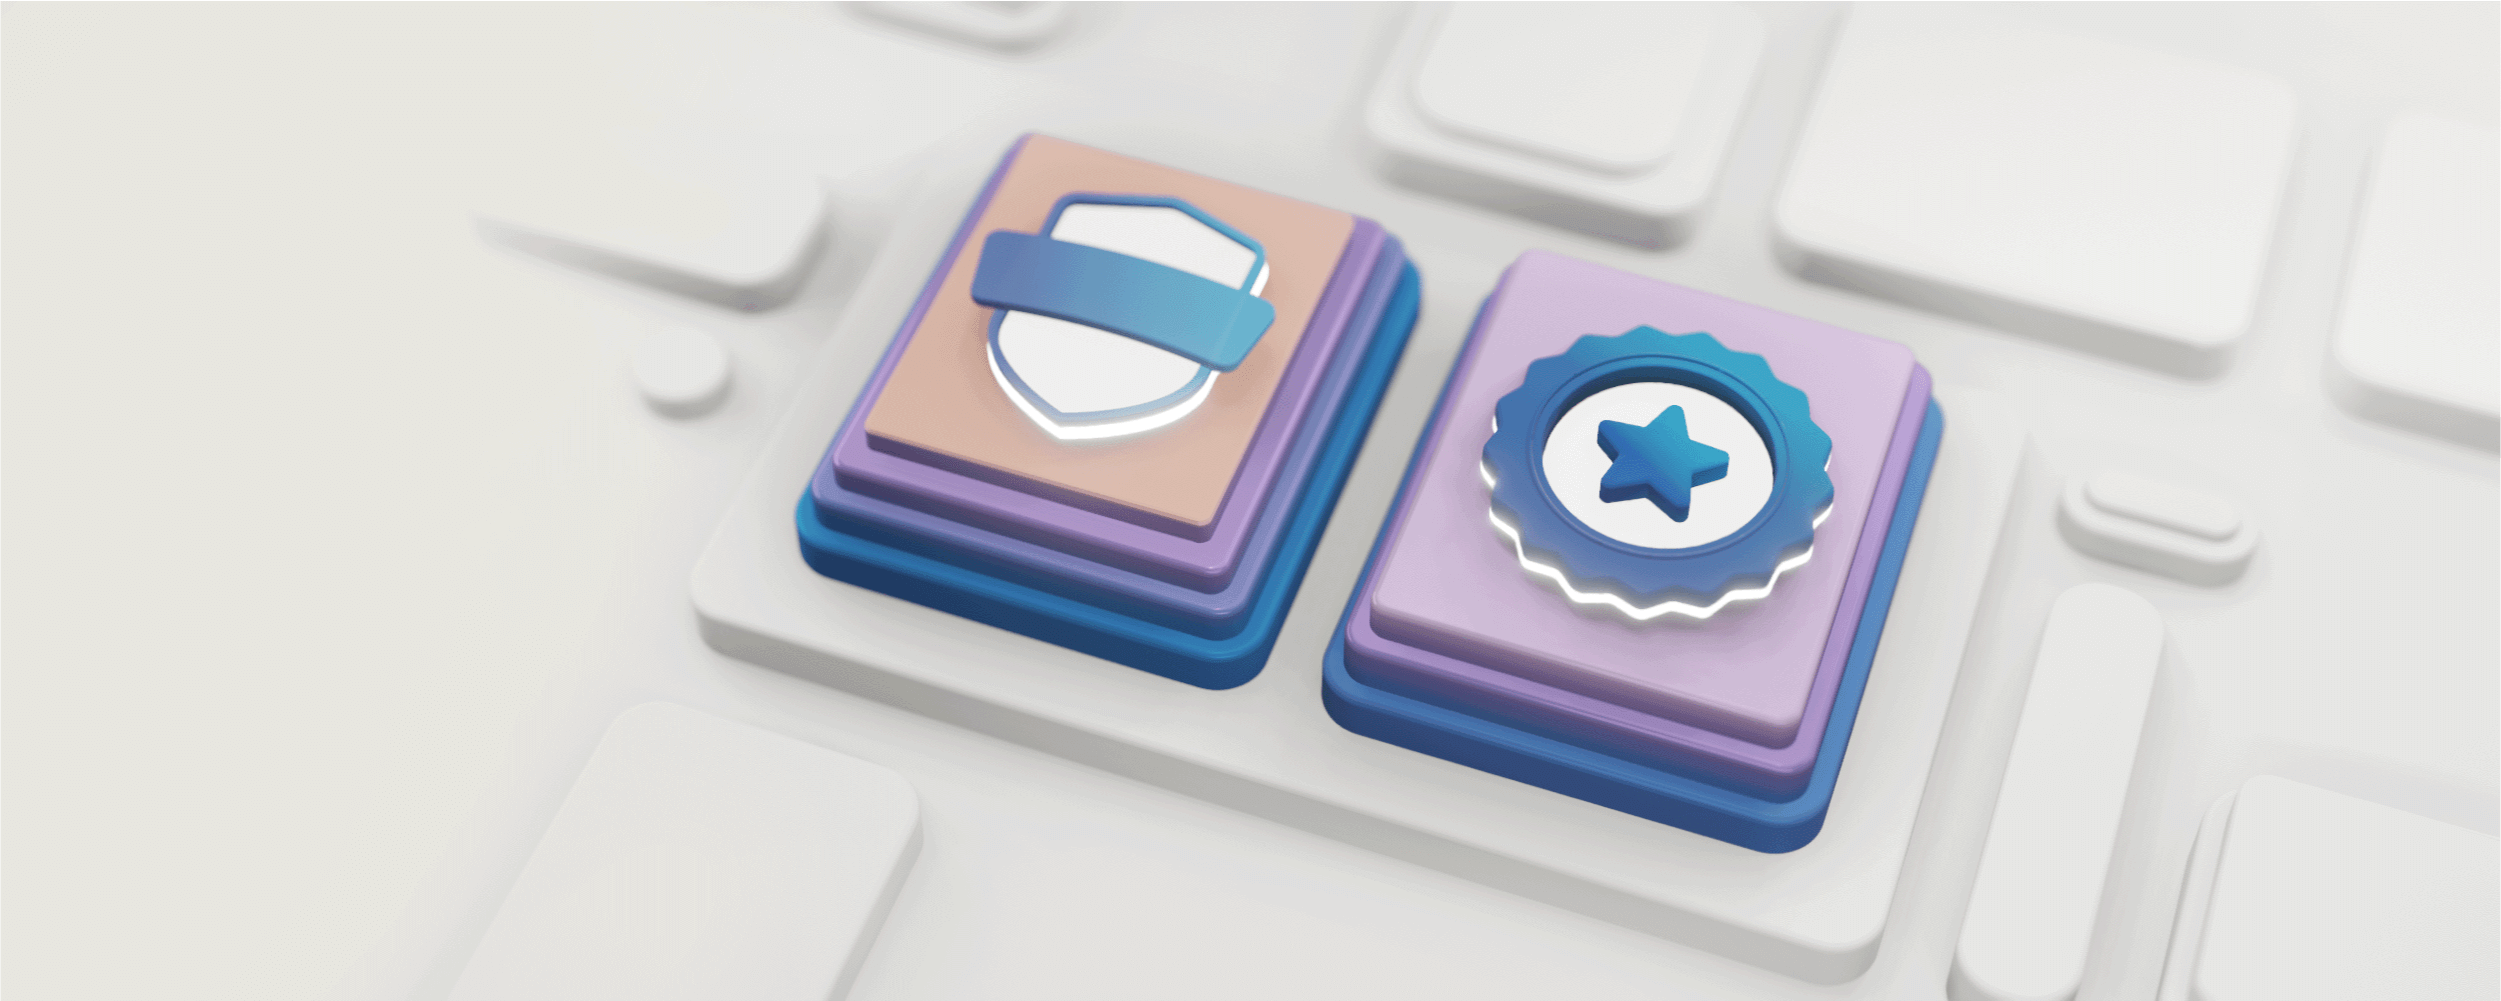 A close up of a keyboard with two keys, one with a shield depicting a certification log, another with a blue star inside a white and blue circle